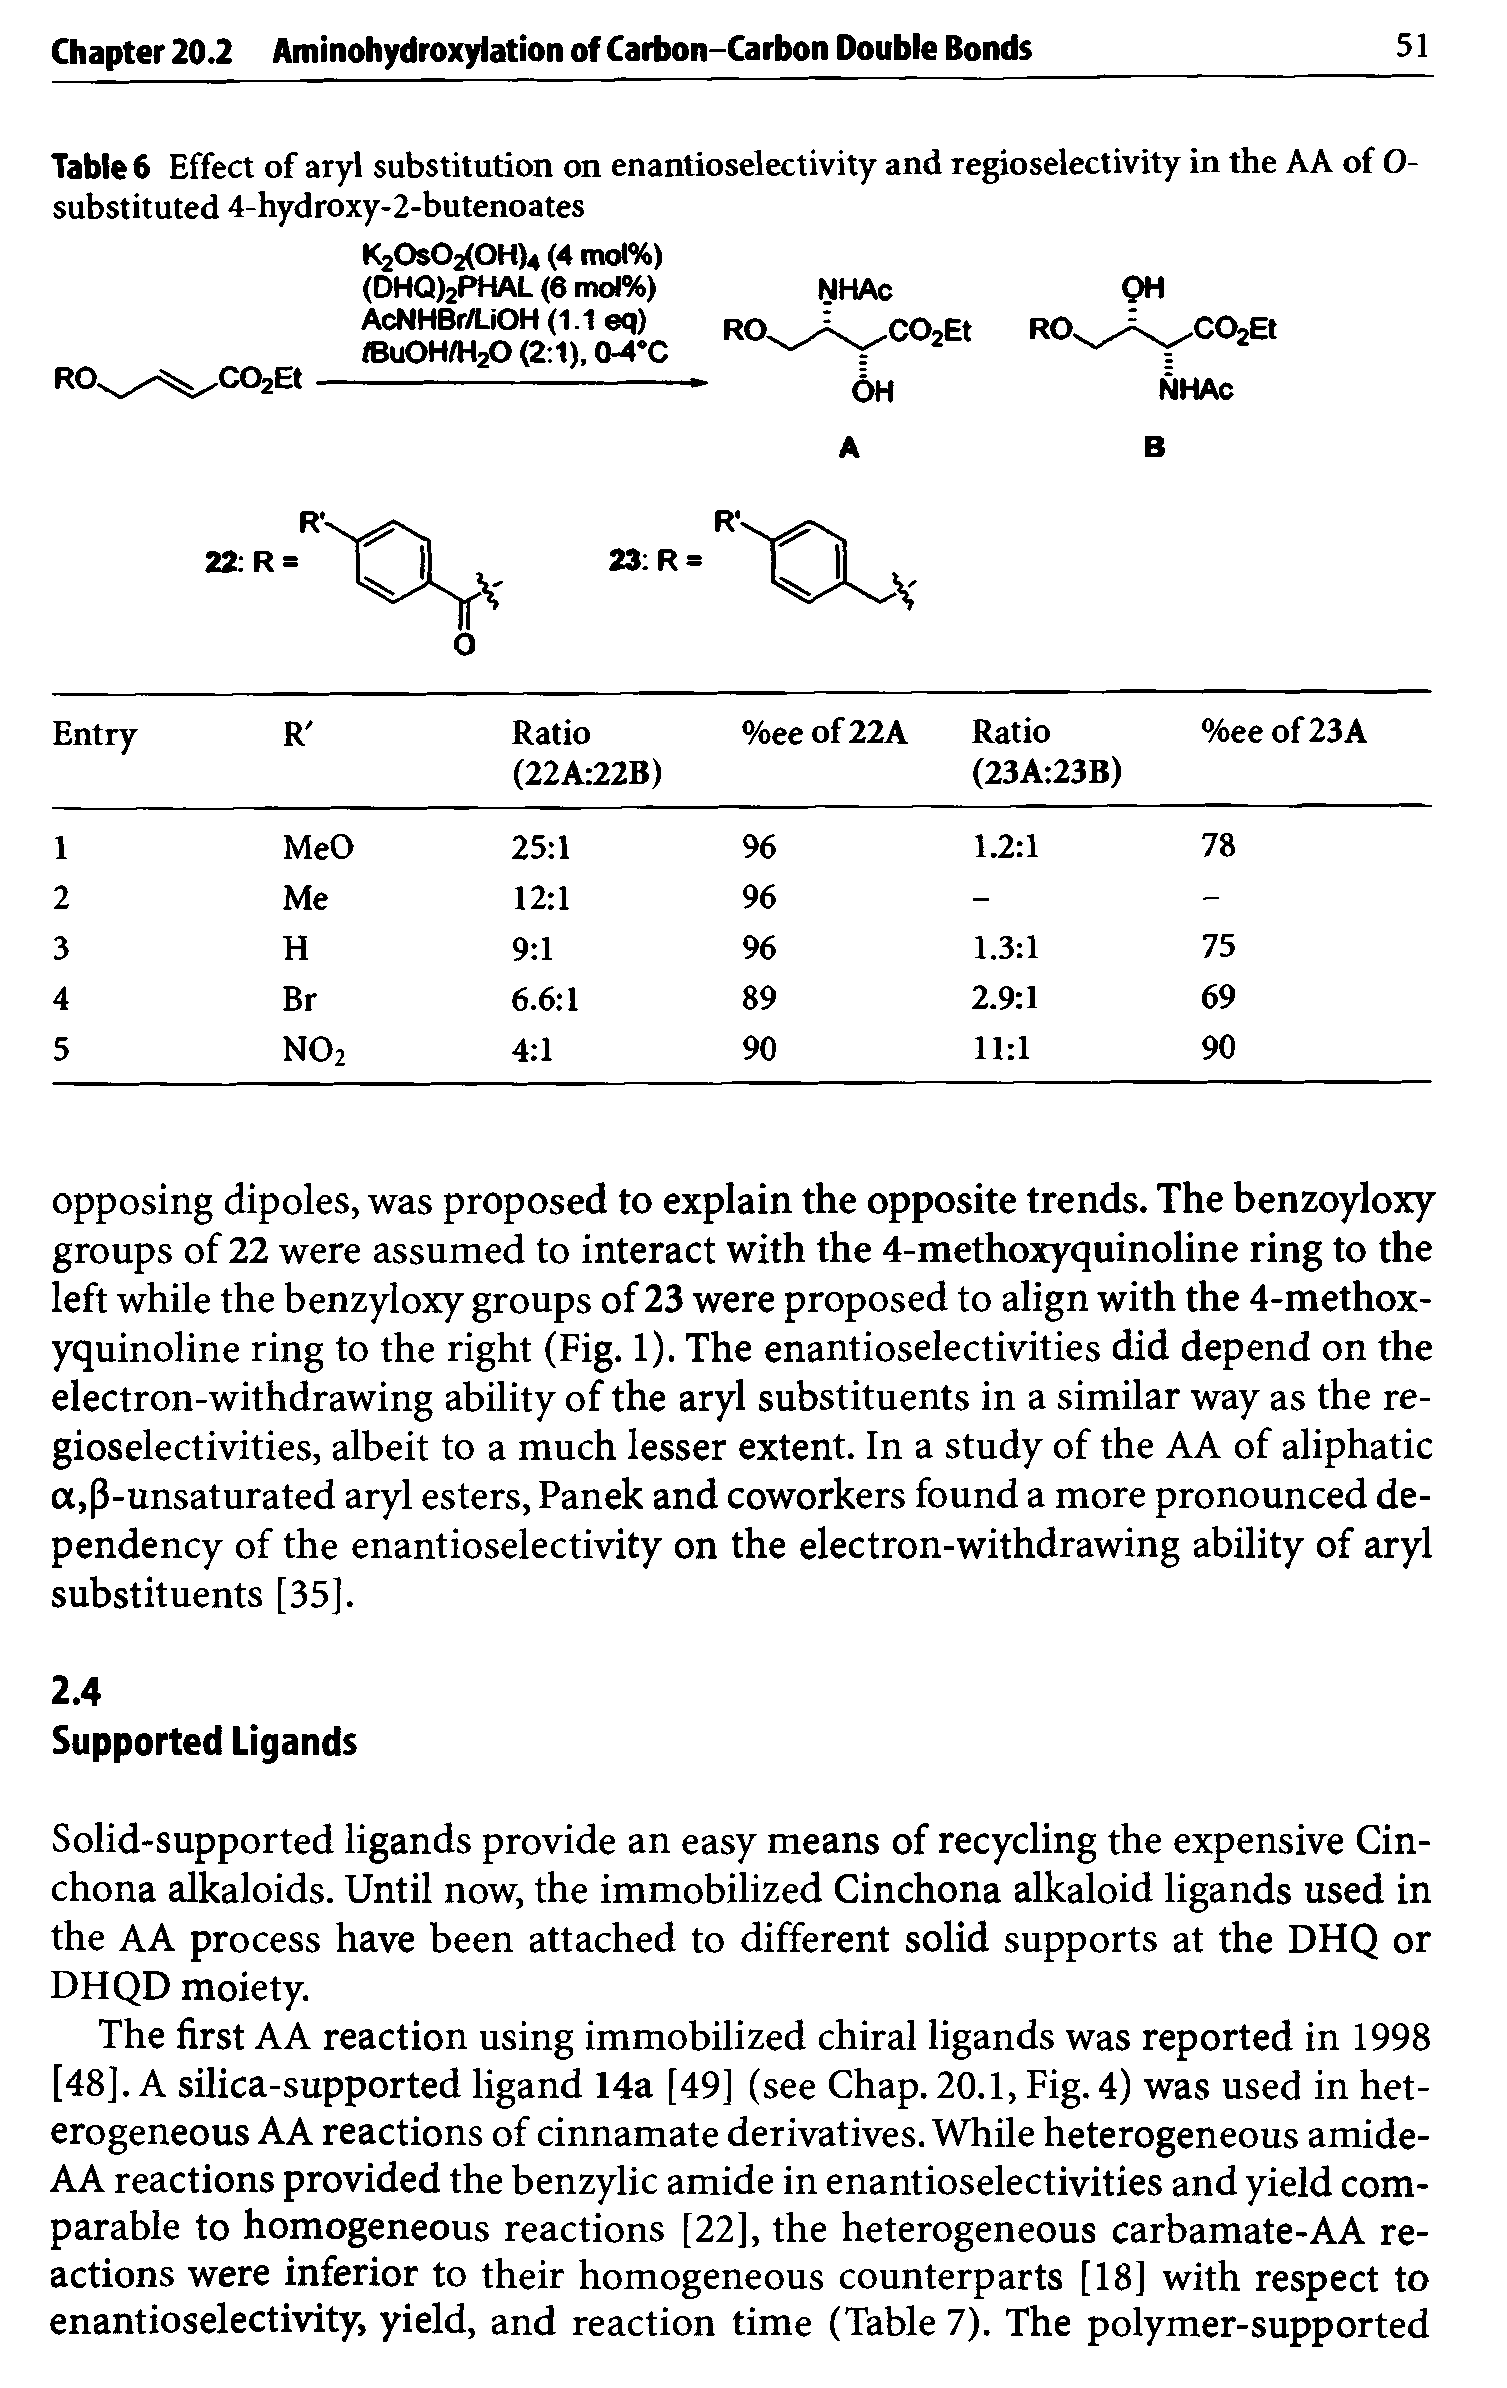 Table 6 Effect of aryl substitution on enantioselectivity and regioselectivity in the AA of O-substituted 4-hydroxy-2-butenoates...